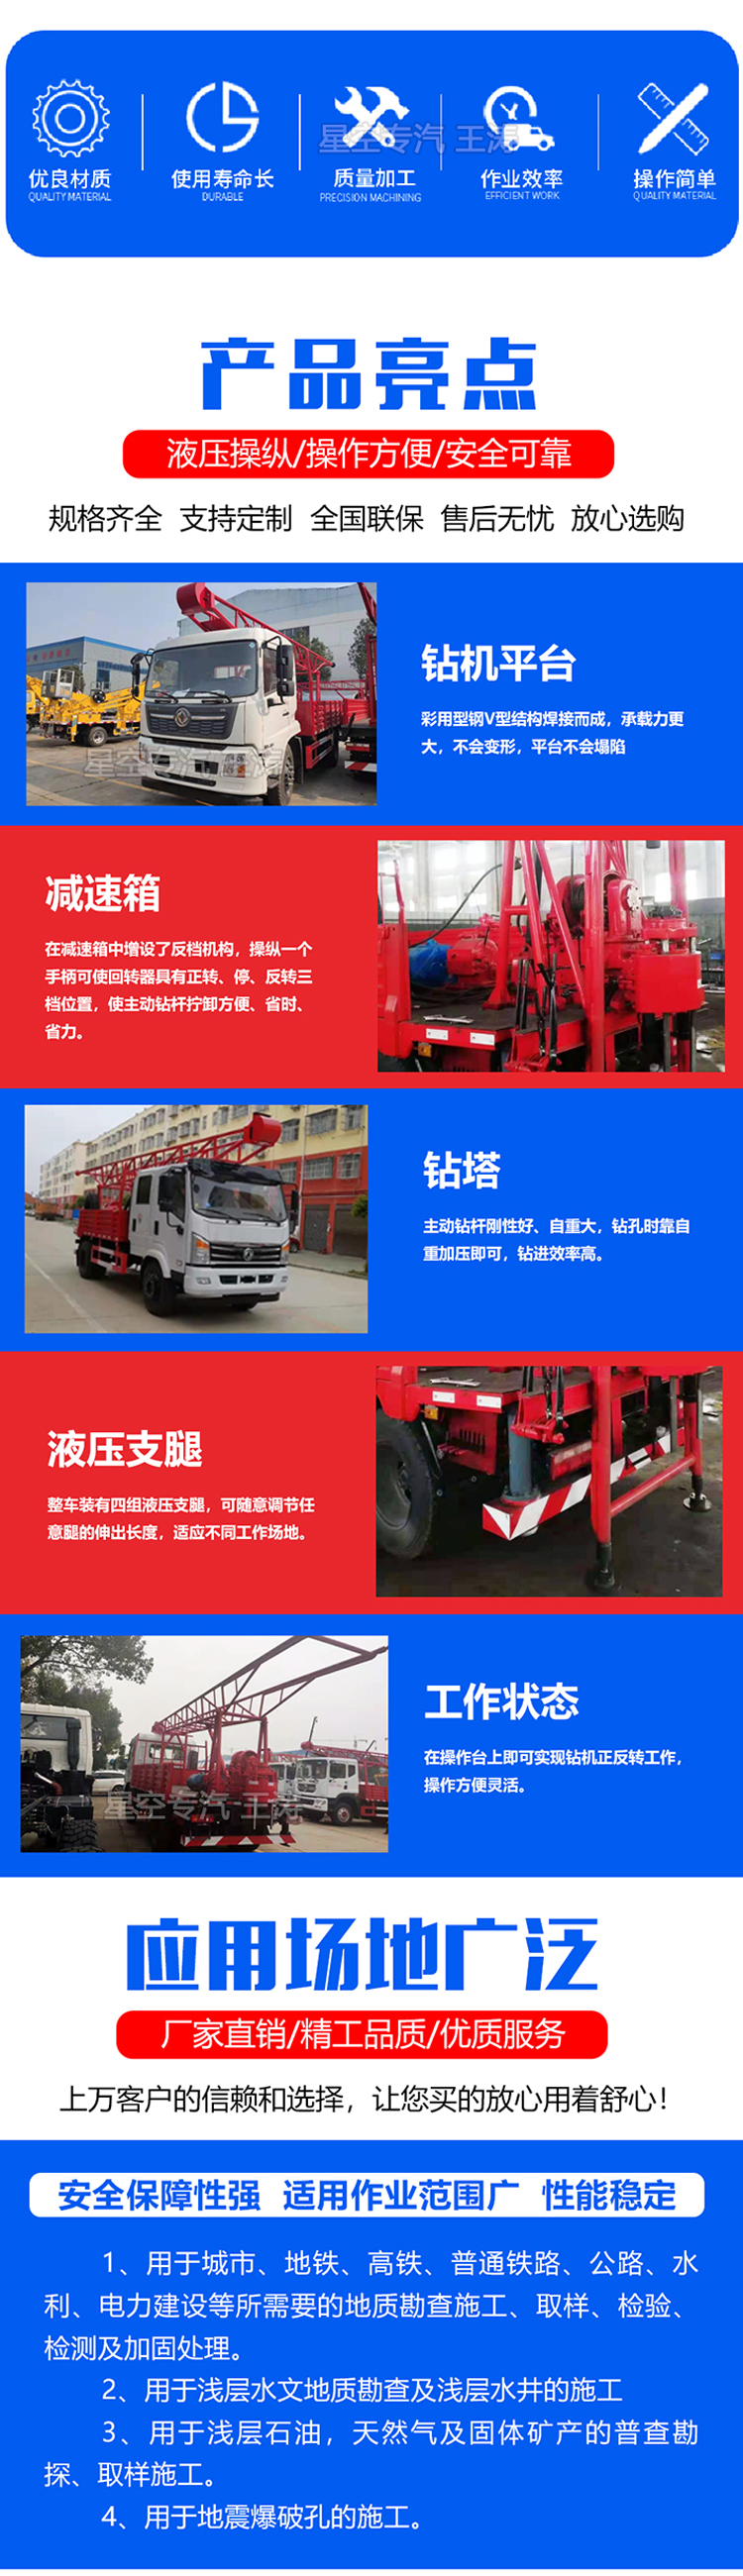 Mobile drilling locomotive hydrogeological water well hydraulic oil heat dissipation system supports staging